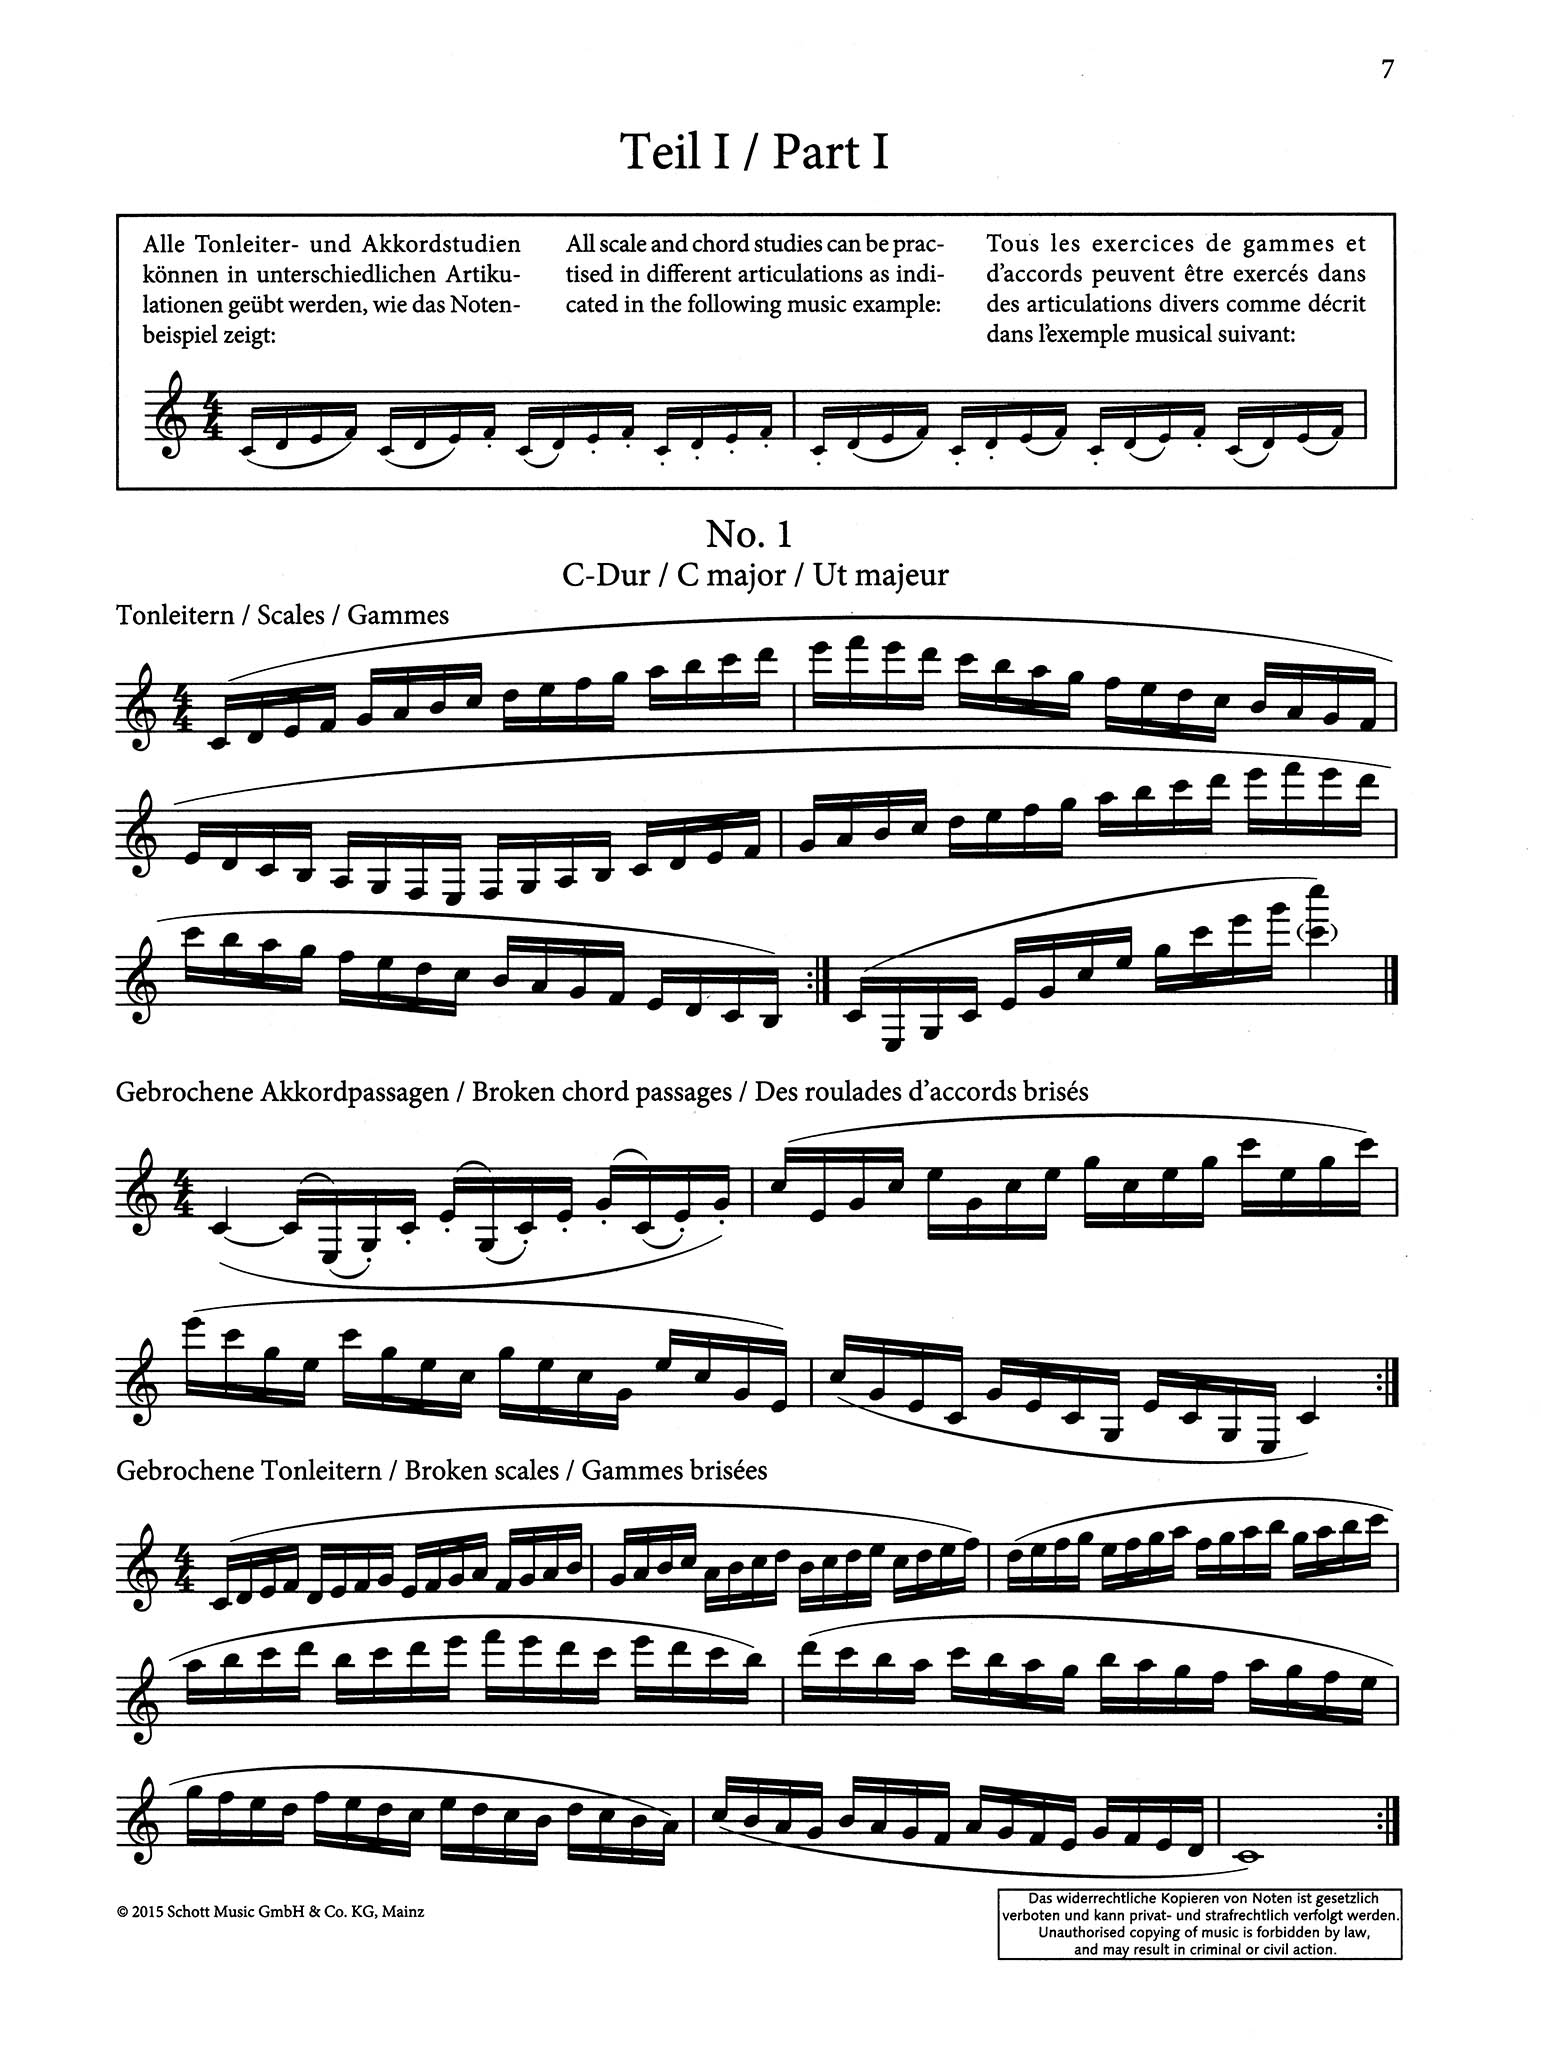 Daily Exercises from the Clarinet Method, Op. 63 Page 7